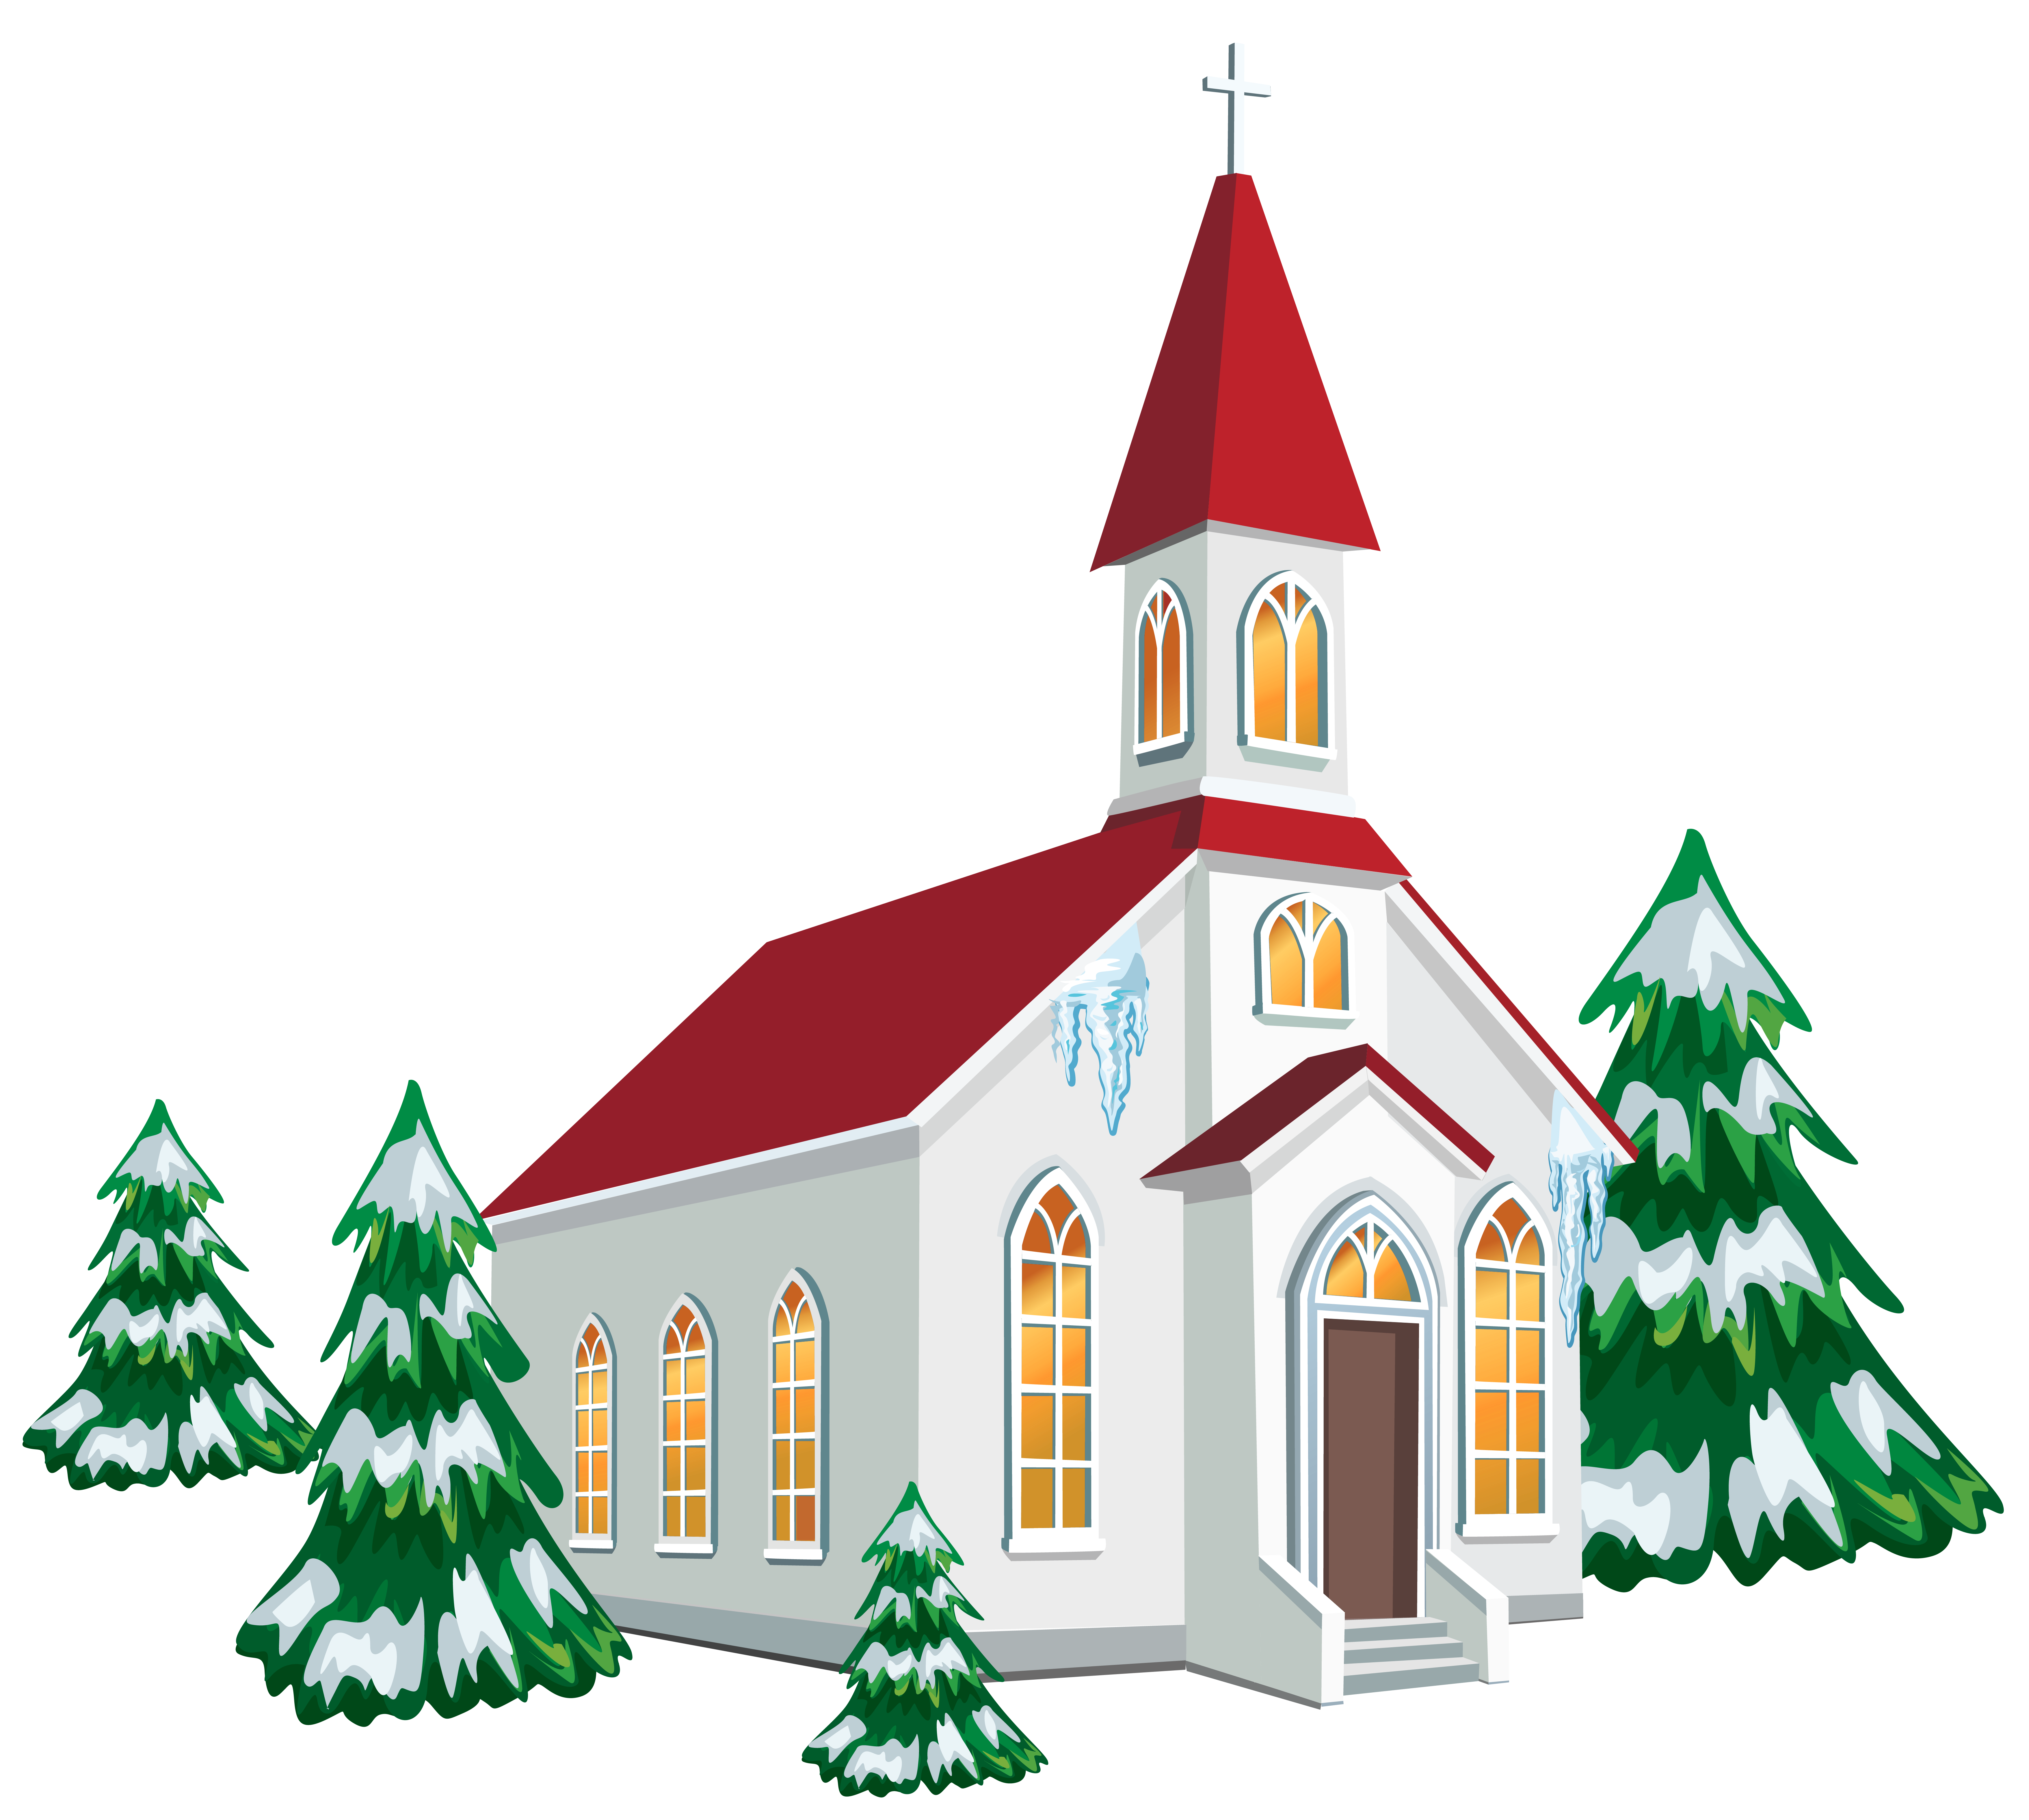 HD foreign church background 